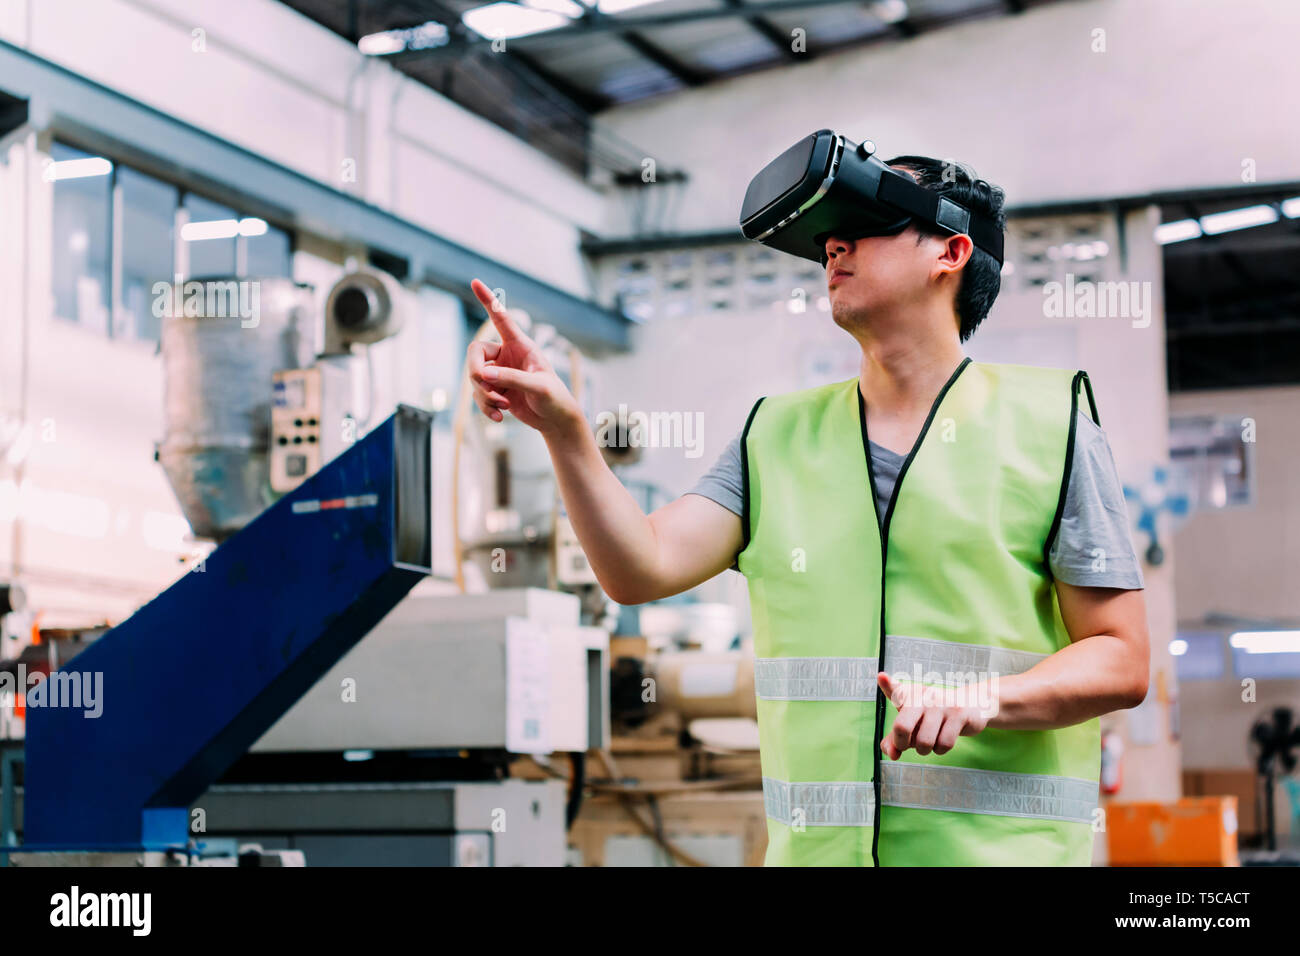 Industrial factory and manfacturing engieering worker wearing VR goggle headset touching in virtual reality simulation alongside heavy duty machines Stock Photo